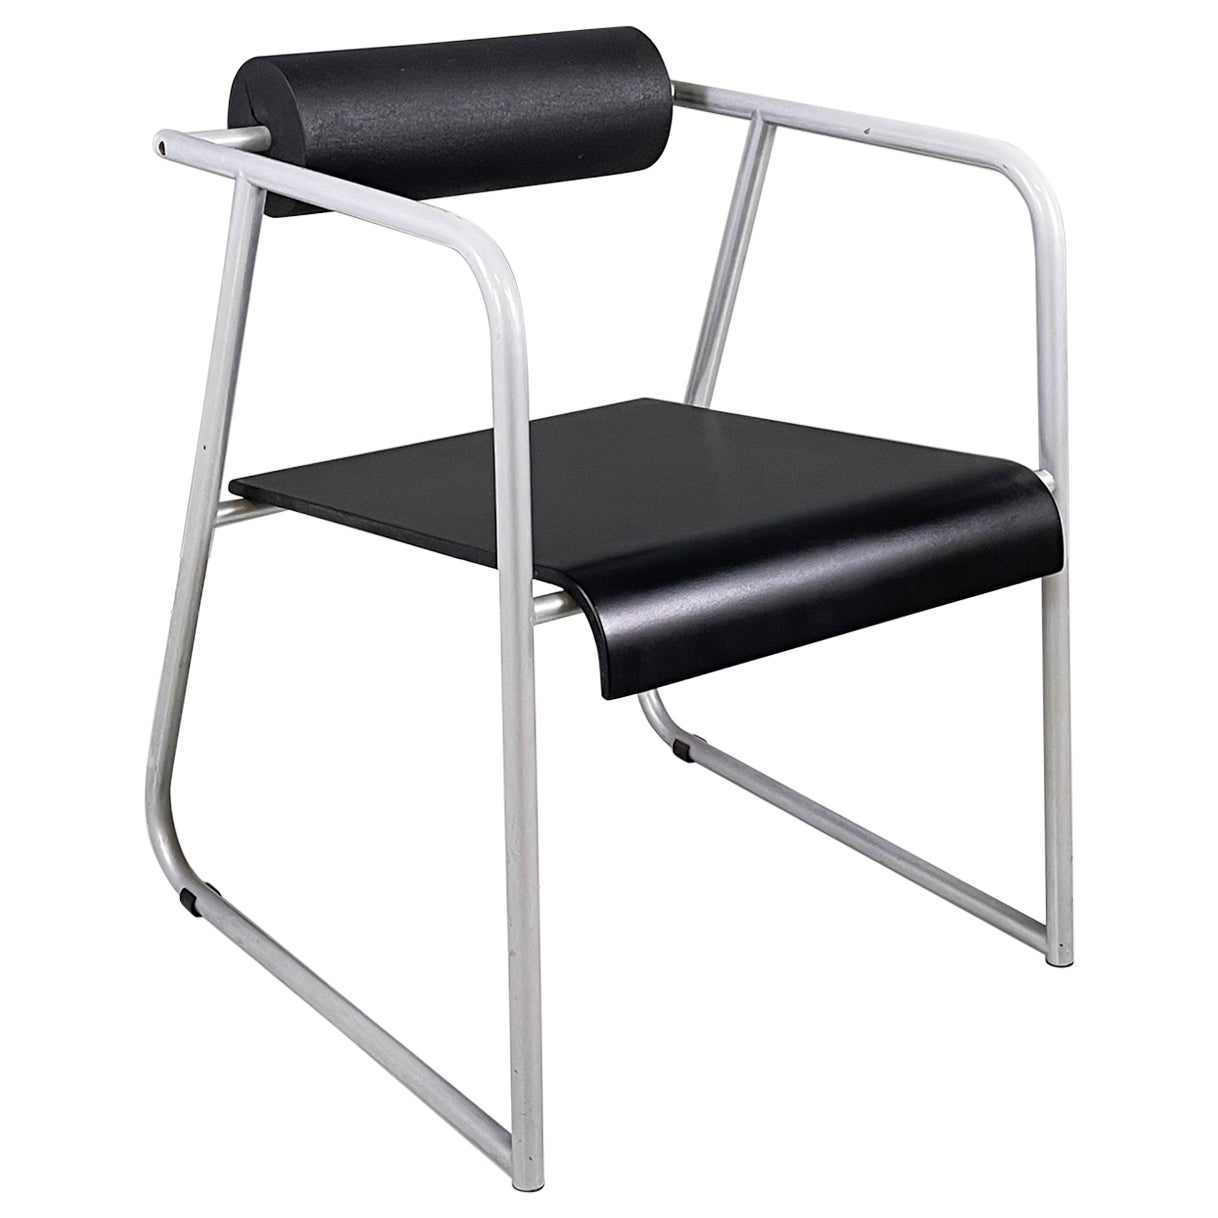 Italian modern Chair in gray metal, black rubber and wood, 1980s For Sale